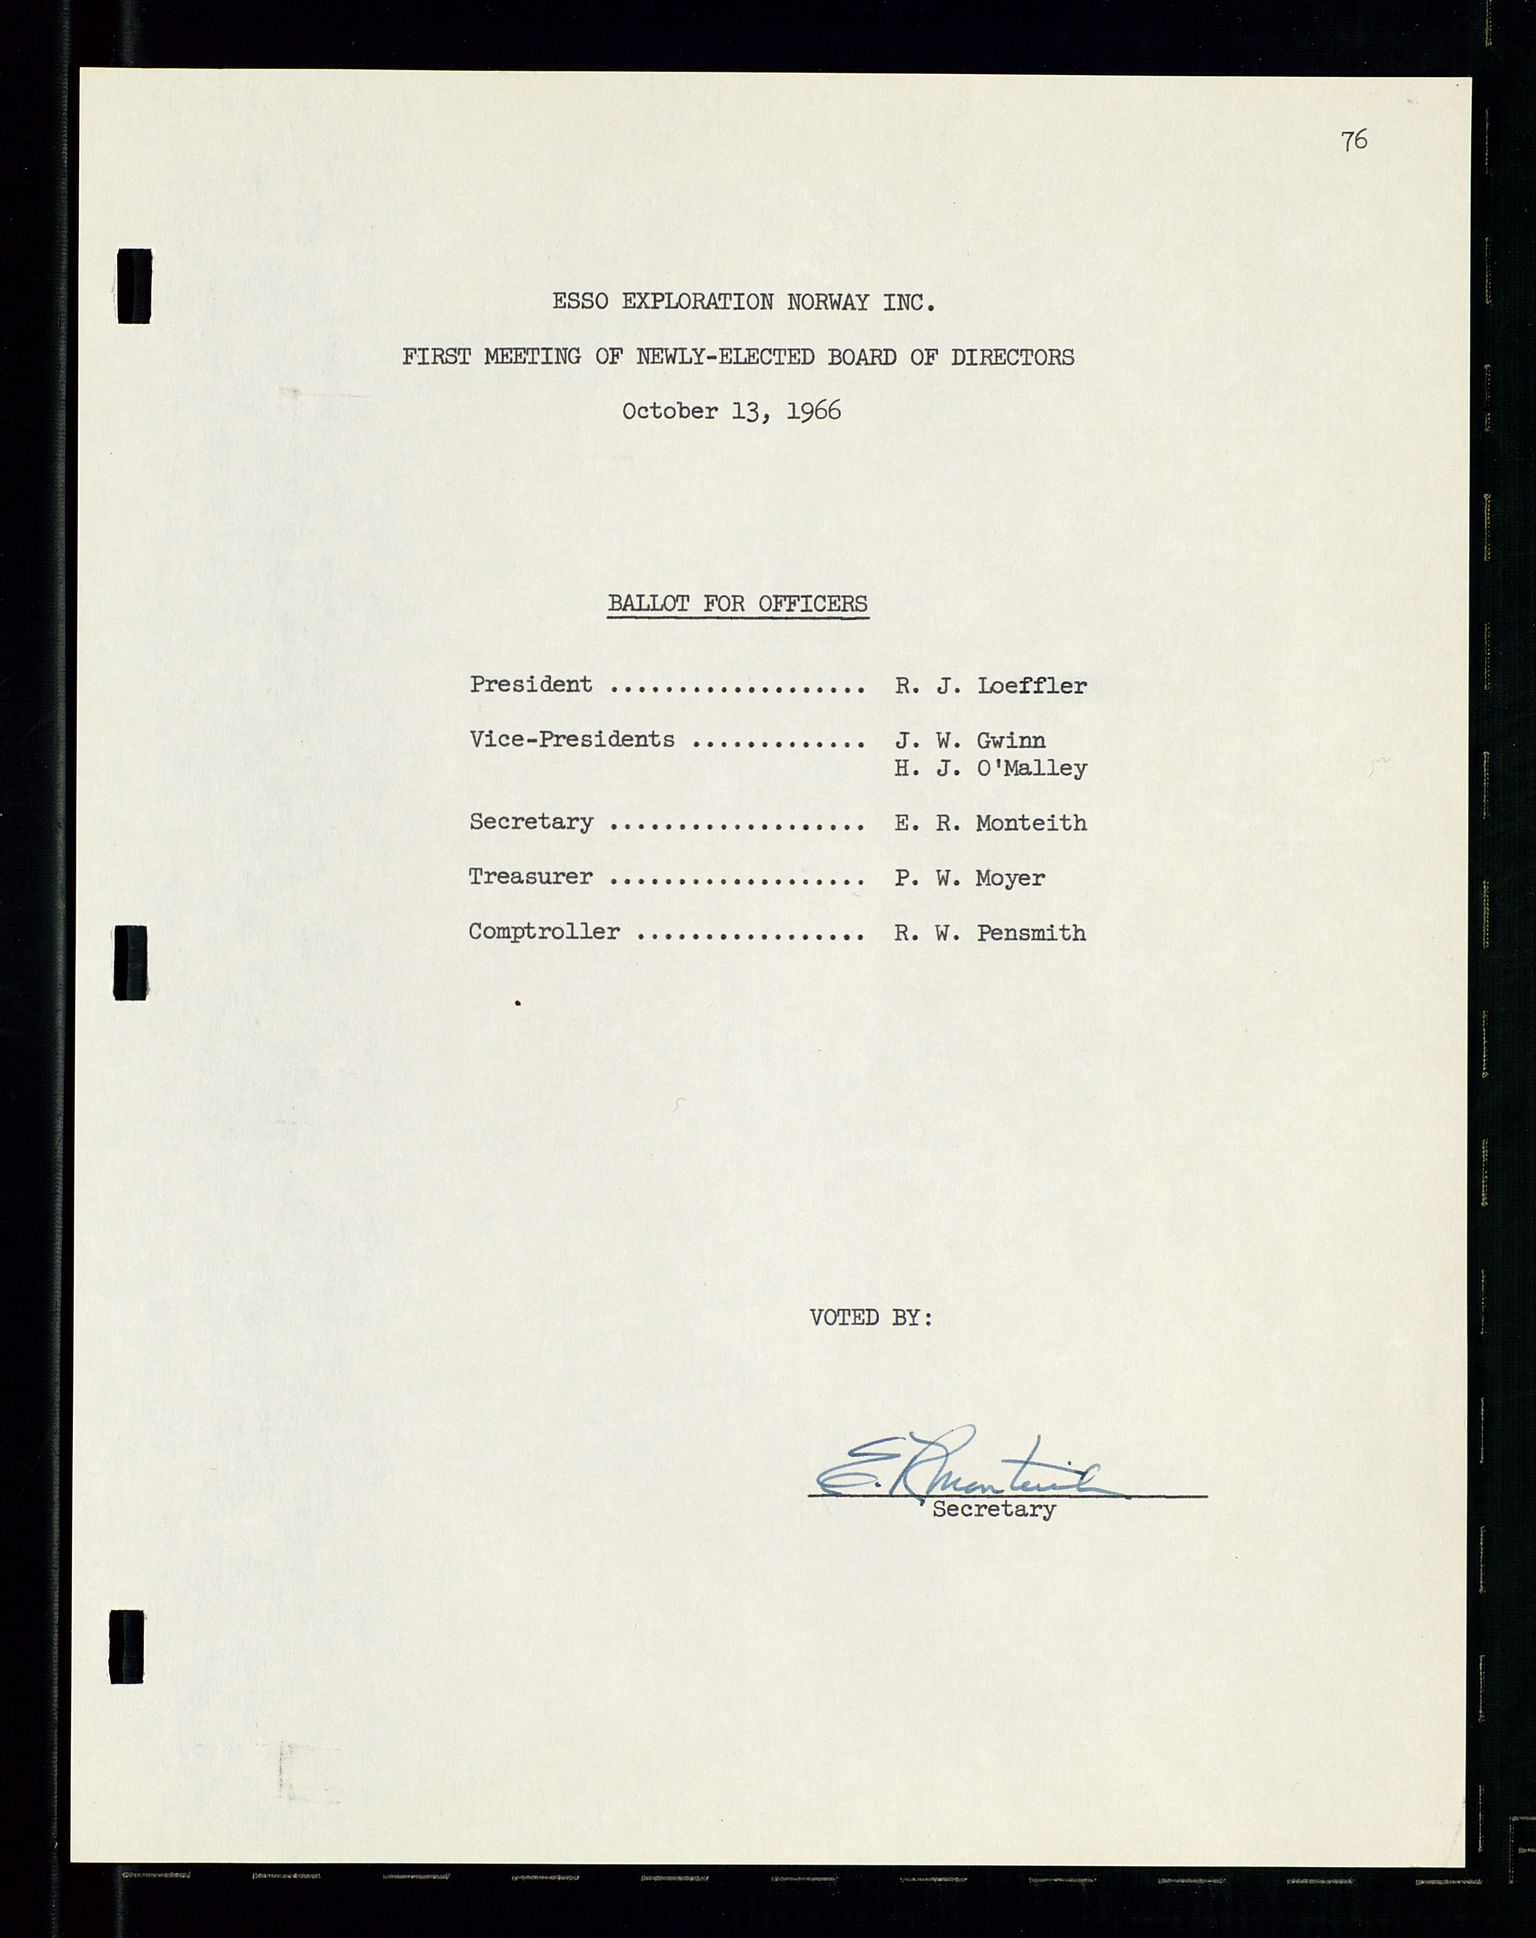 Pa 1512 - Esso Exploration and Production Norway Inc., SAST/A-101917/A/Aa/L0001/0001: Styredokumenter / Corporate records, By-Laws, Board meeting minutes, Incorporations, 1965-1975, p. 76